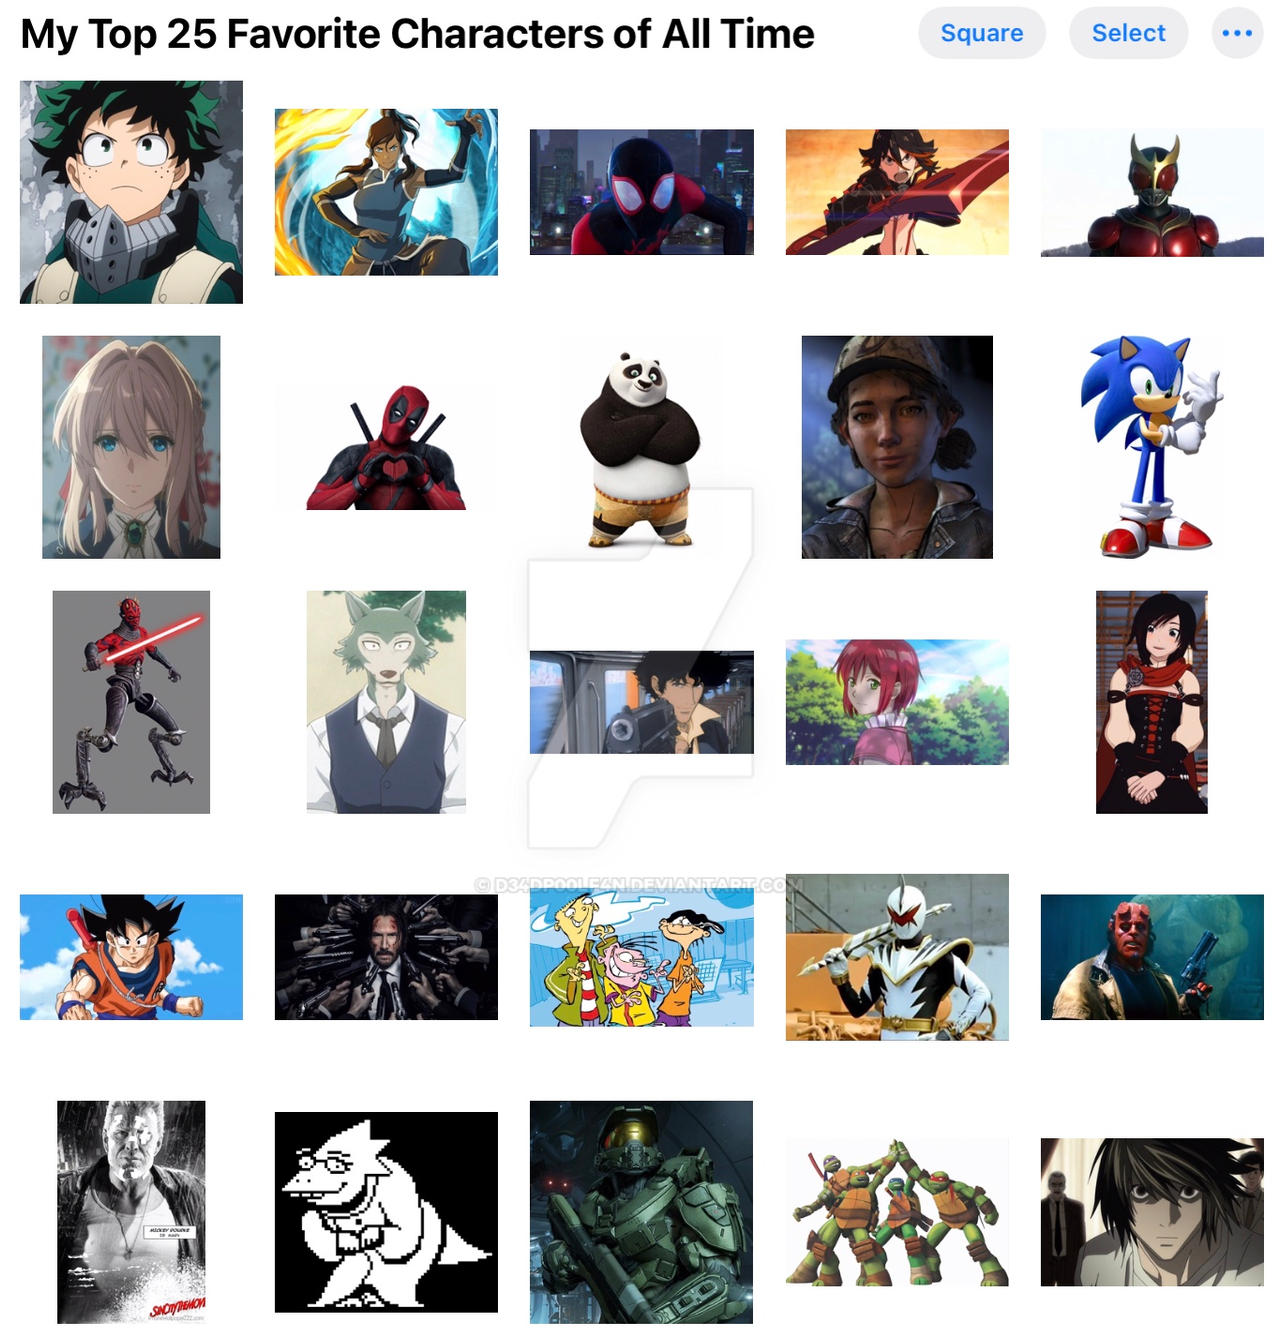 Media] My top 25 characters in order! I will also be telling all